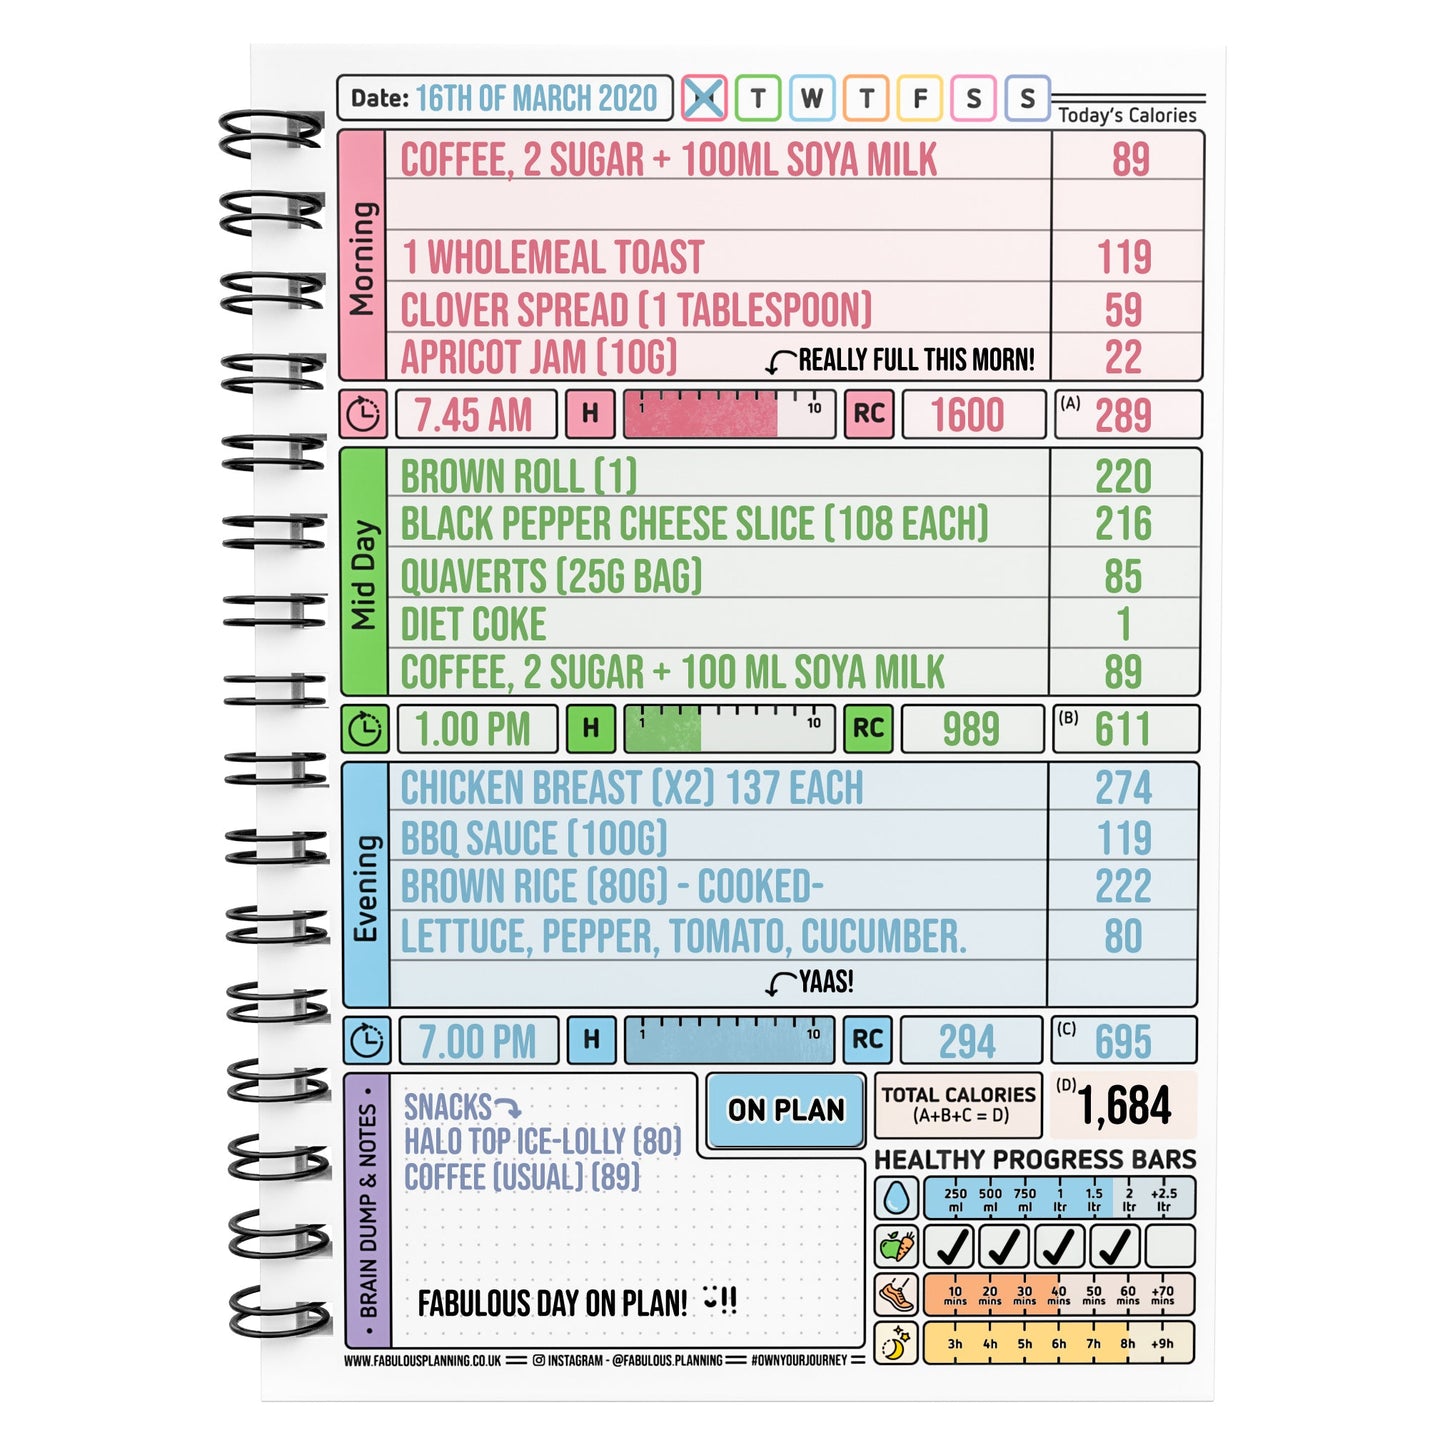 Food Diary - C64 - Calorie Counting - Fabulous Planning - [W] 3MTH - CAL - C64+